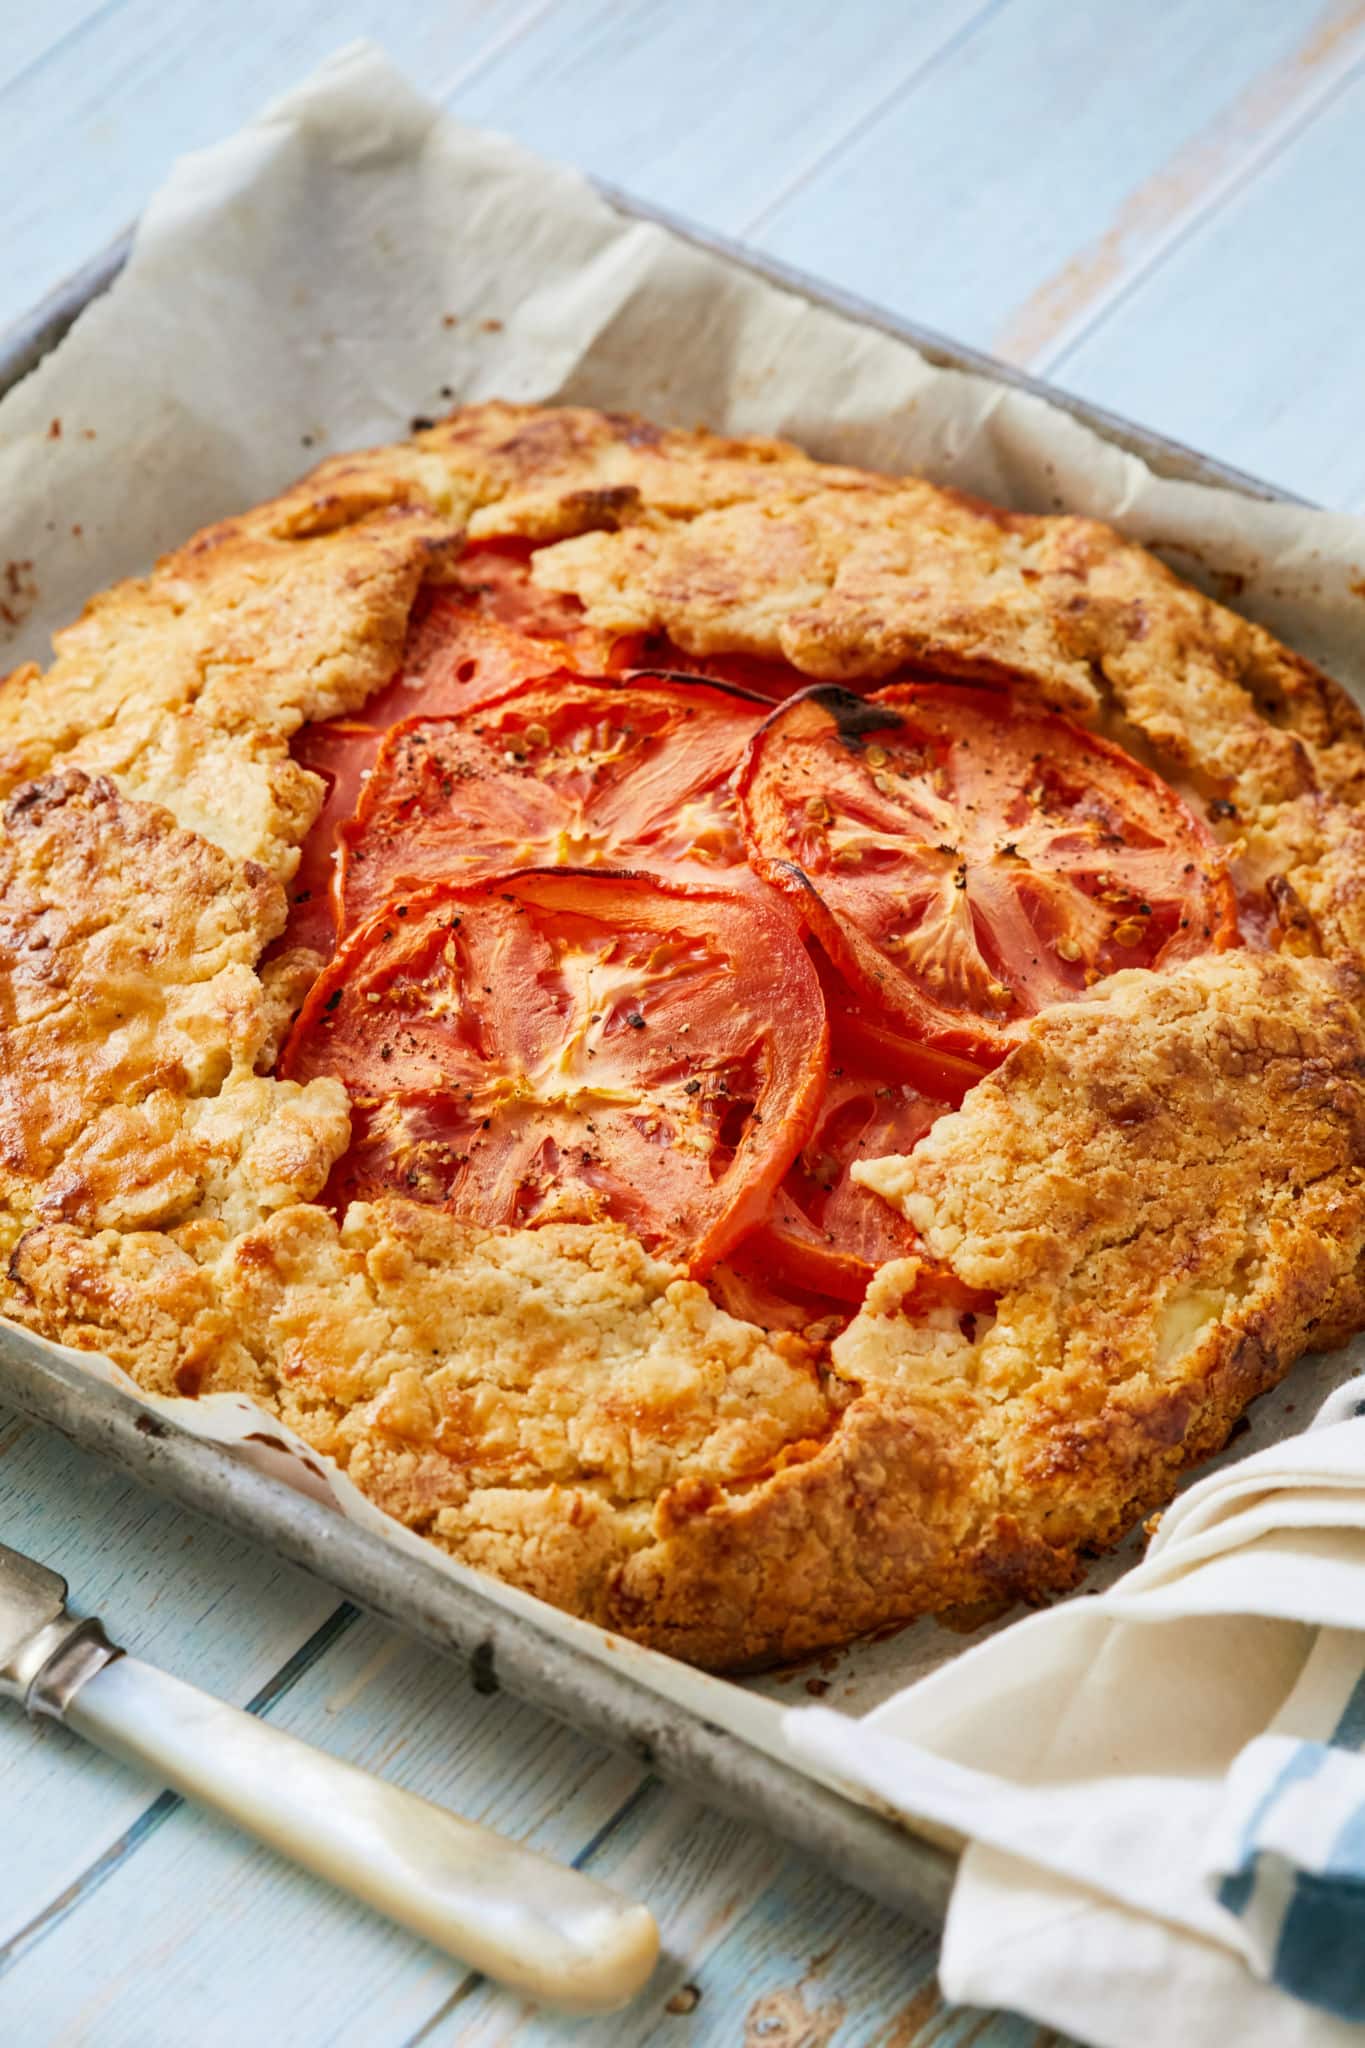 A look at the tomatoes and crust in this galette.